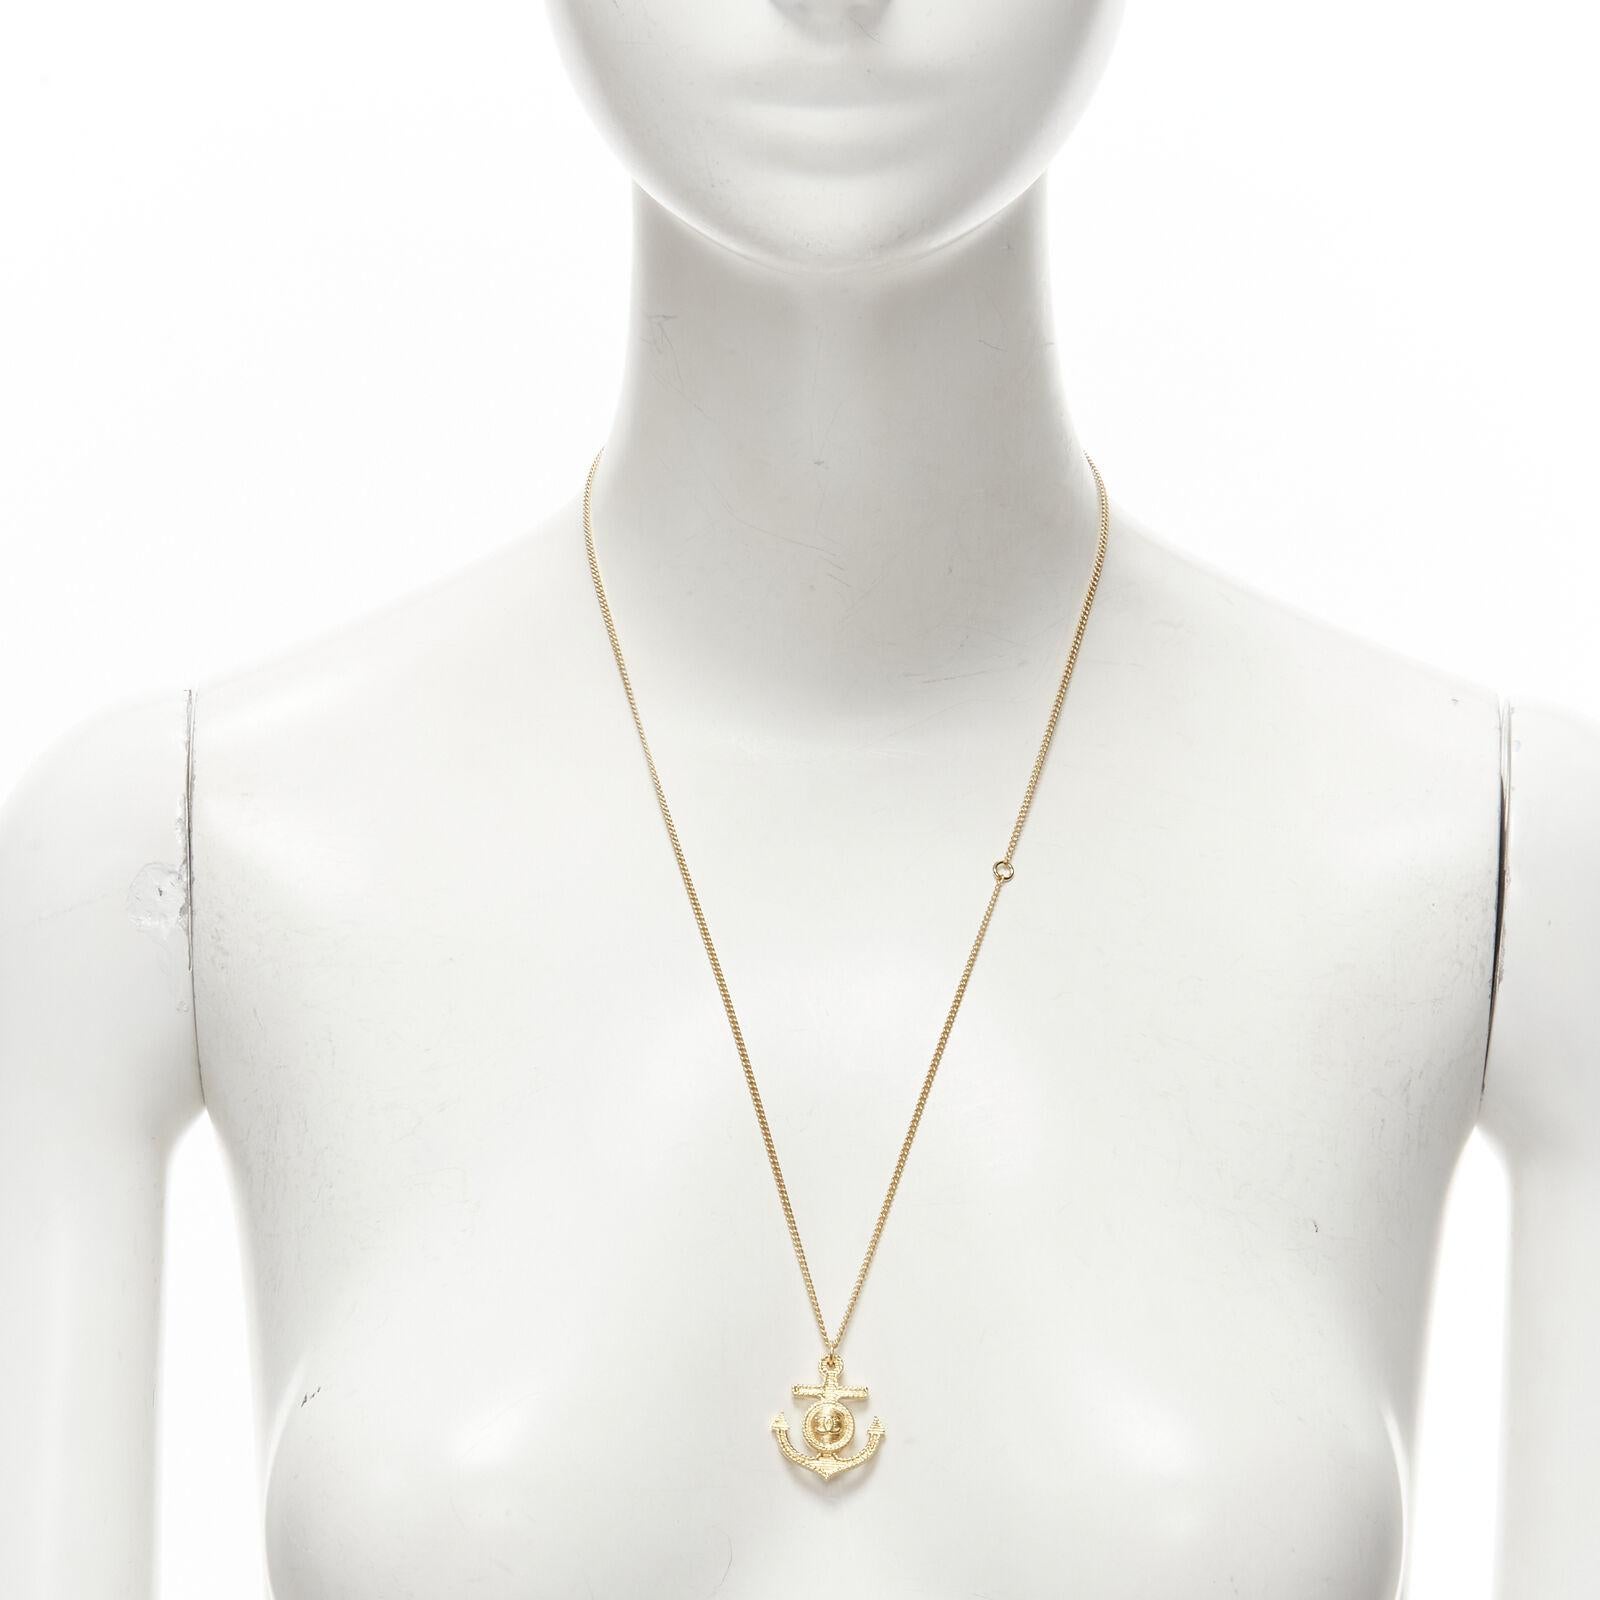 CHANEL B18A CC logo gold tone textured anchor nautical pendant necklace
Reference: TGAS/C01555
Brand: Chanel
Designer: Virginie Viard
Collection: 18A Paris Hamburg
Material: Metal
Color: Gold
Pattern: Solid
Closure: Lobster Clasp
Made in: